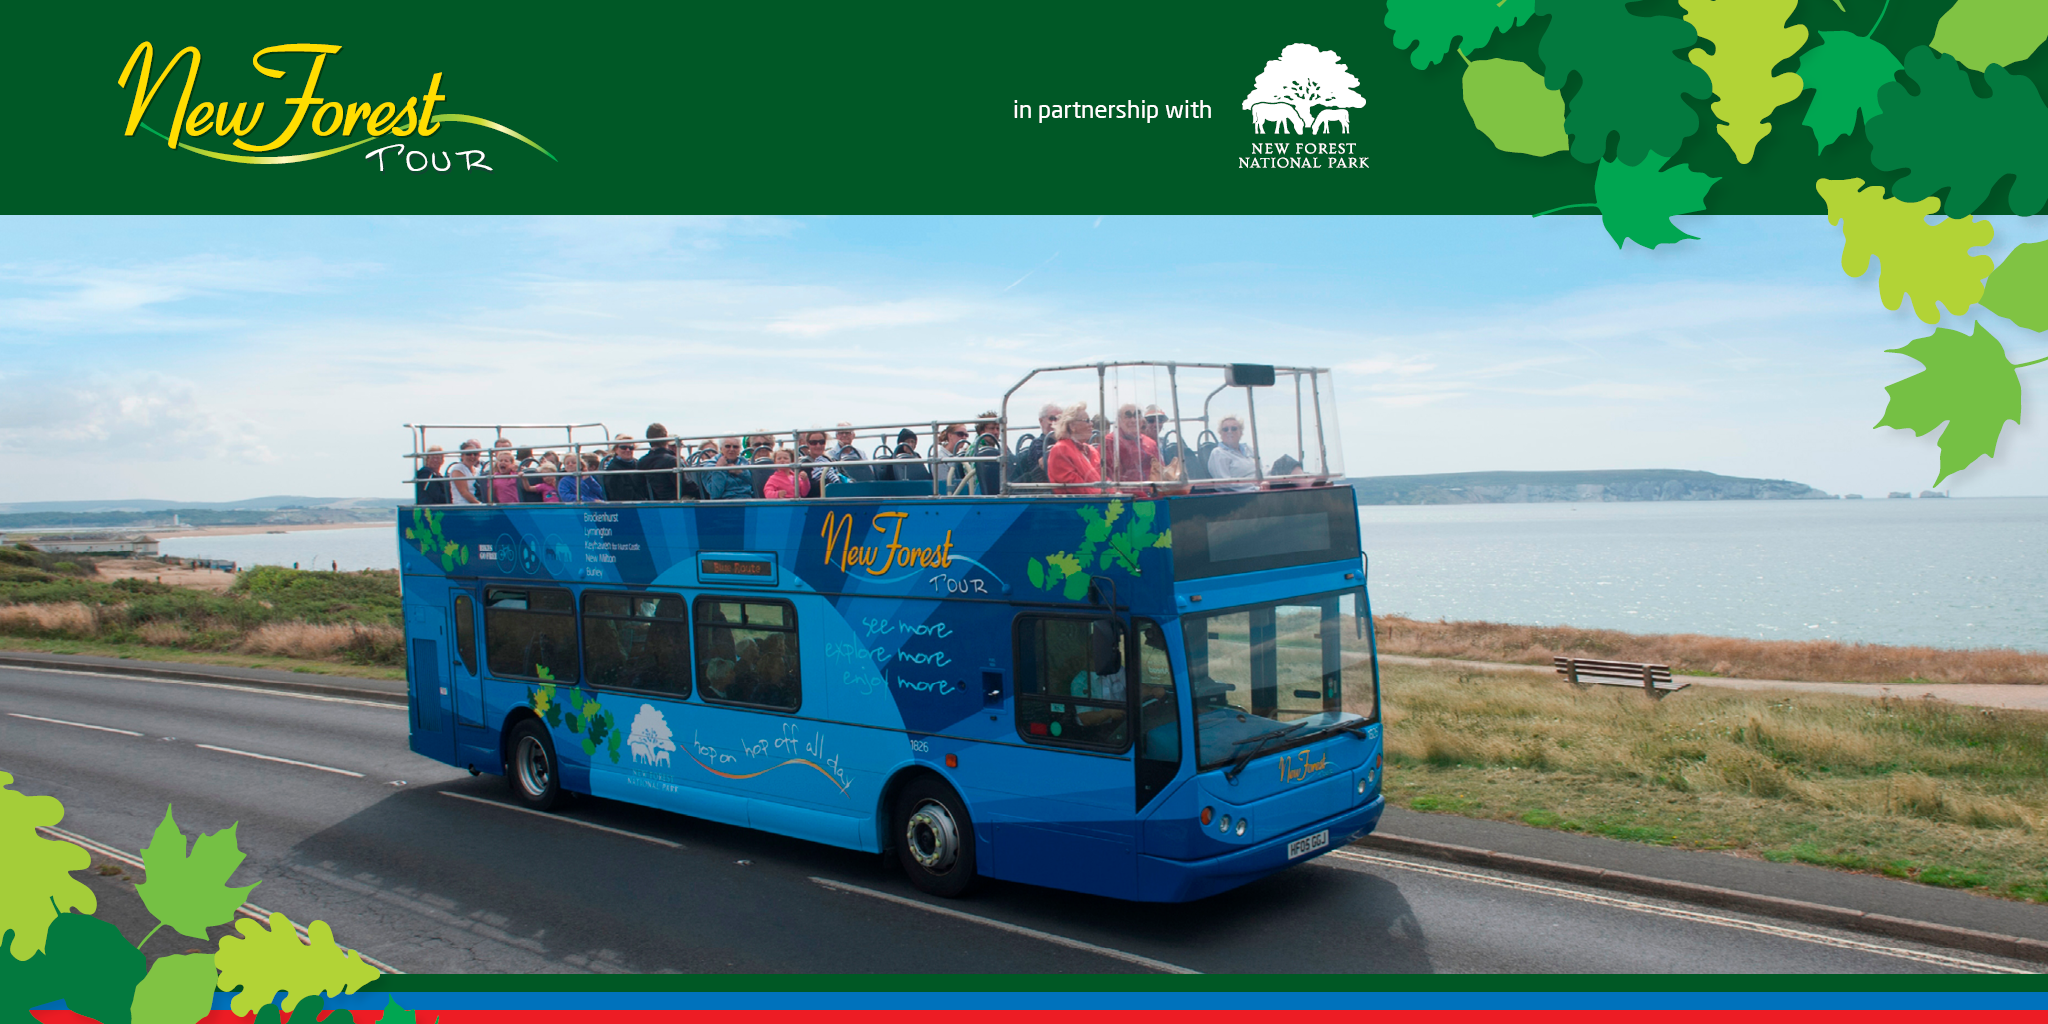 Picture of Blue route bus by the sea